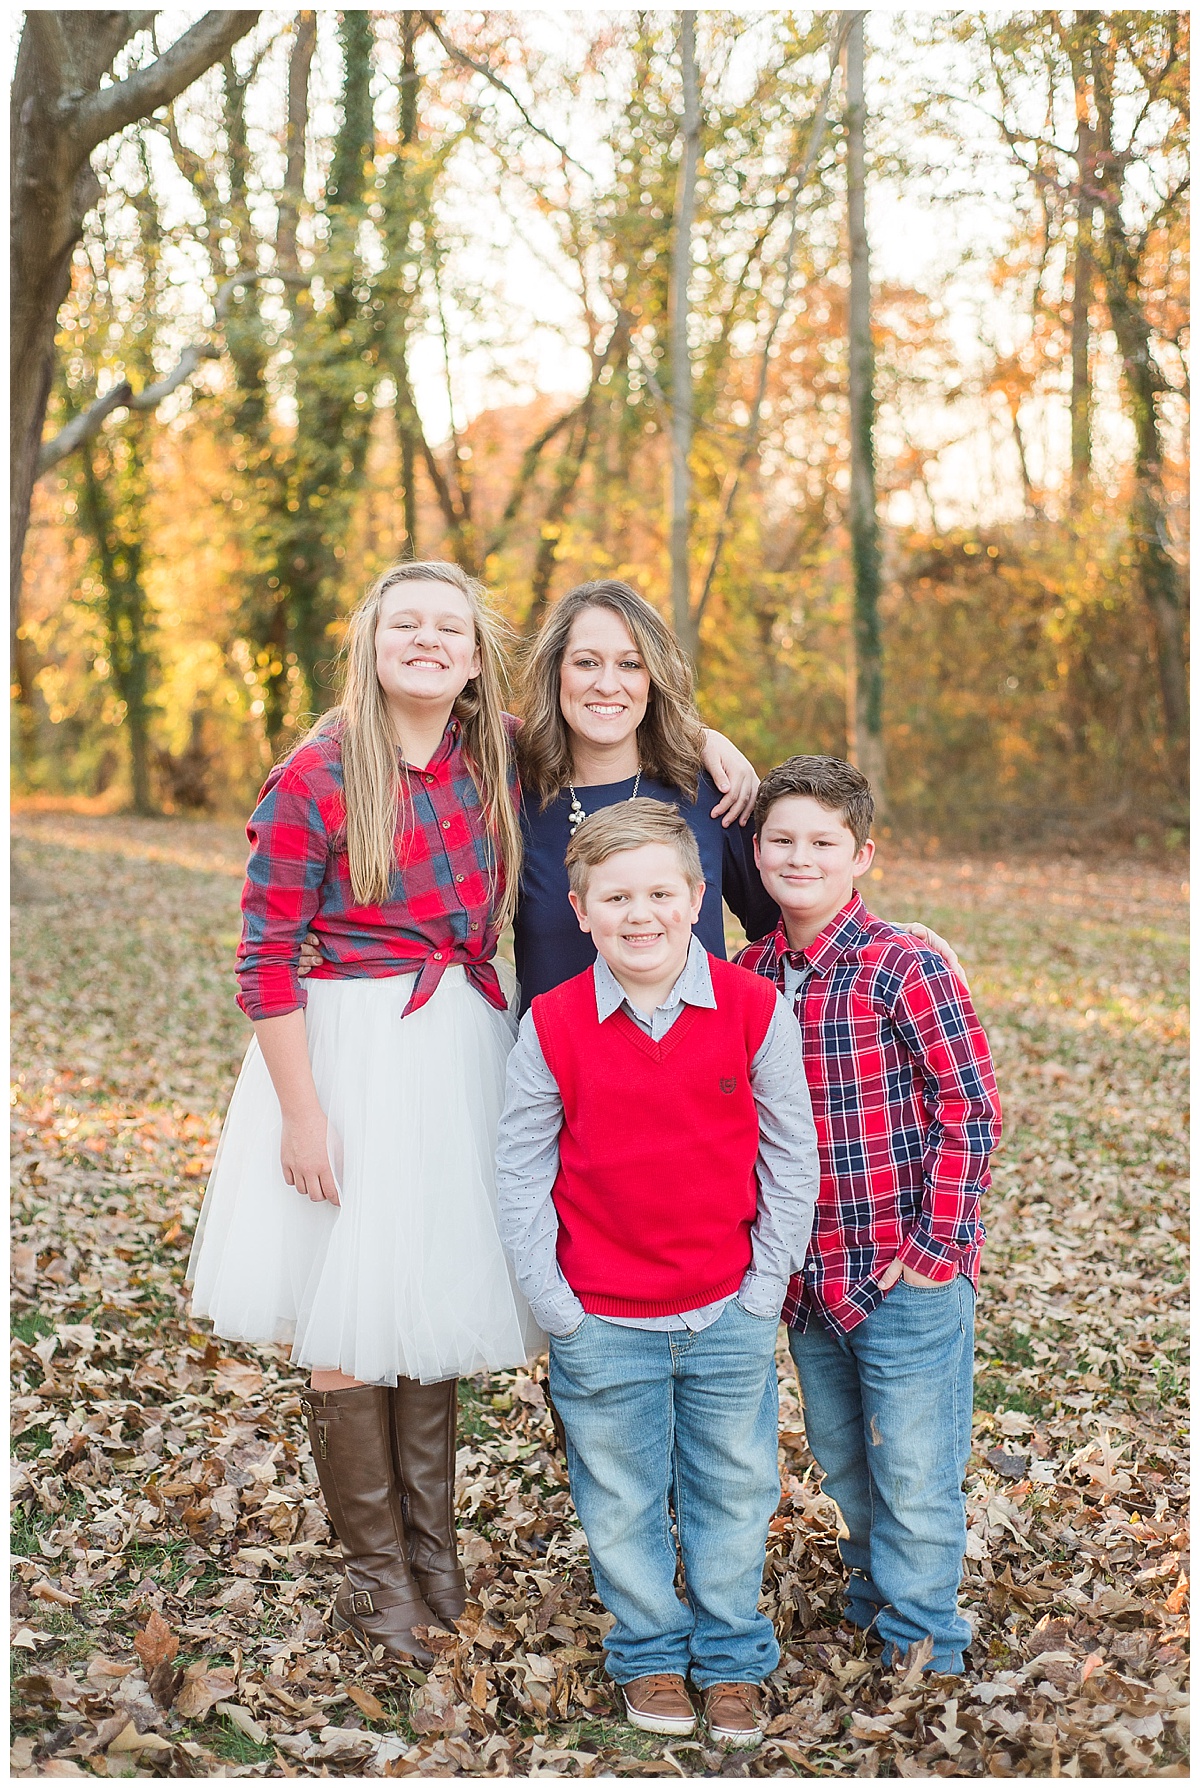 Fall Family Pictures, Prince George Virginia, Central Virginia Photographer, Weston Plantation, Virginia Family Photographer, Caiti Garter Photography 